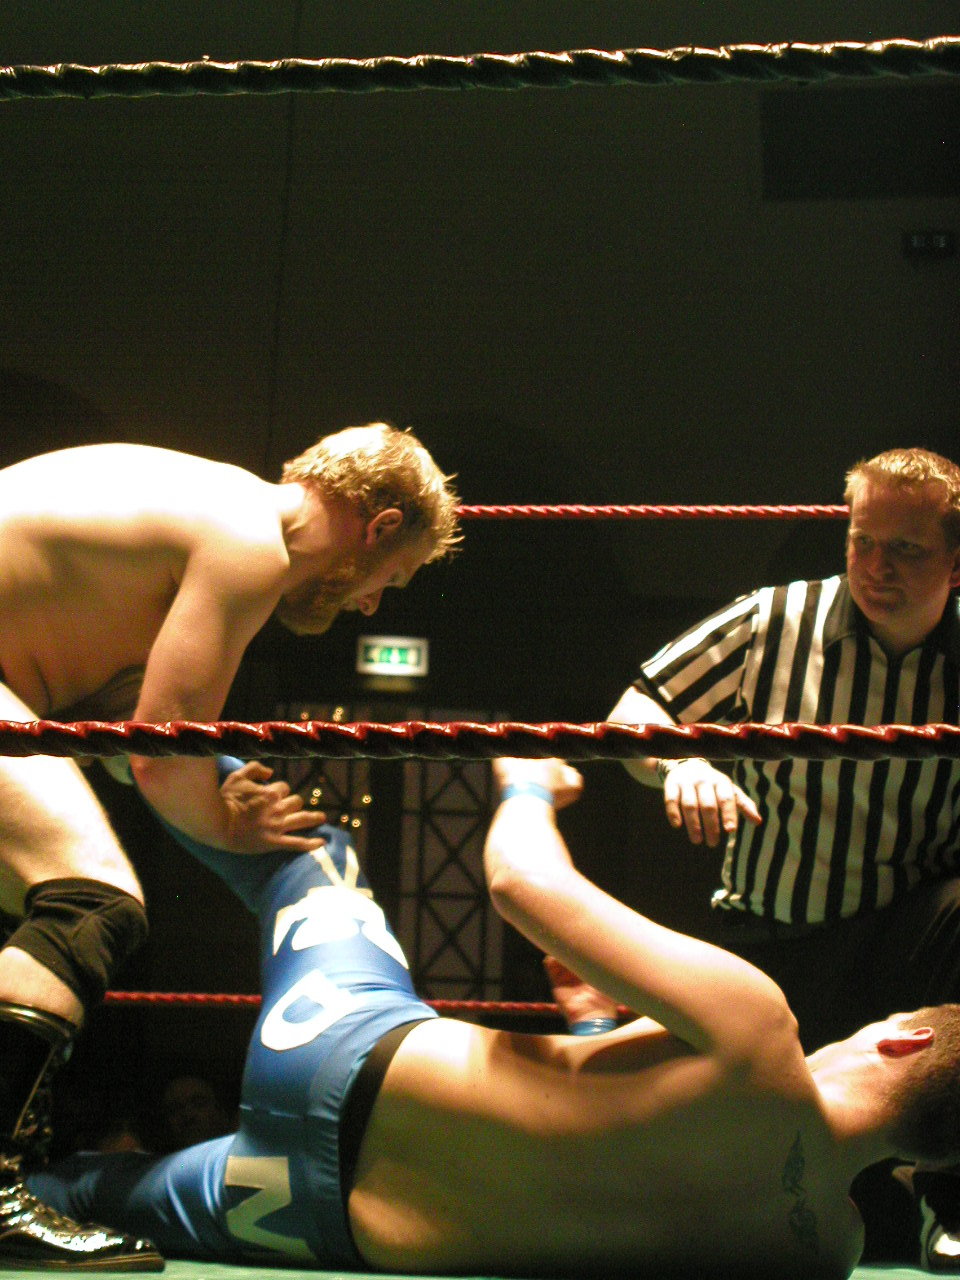 a wrestling referee and a guy in the ring, with an referee standing behind him